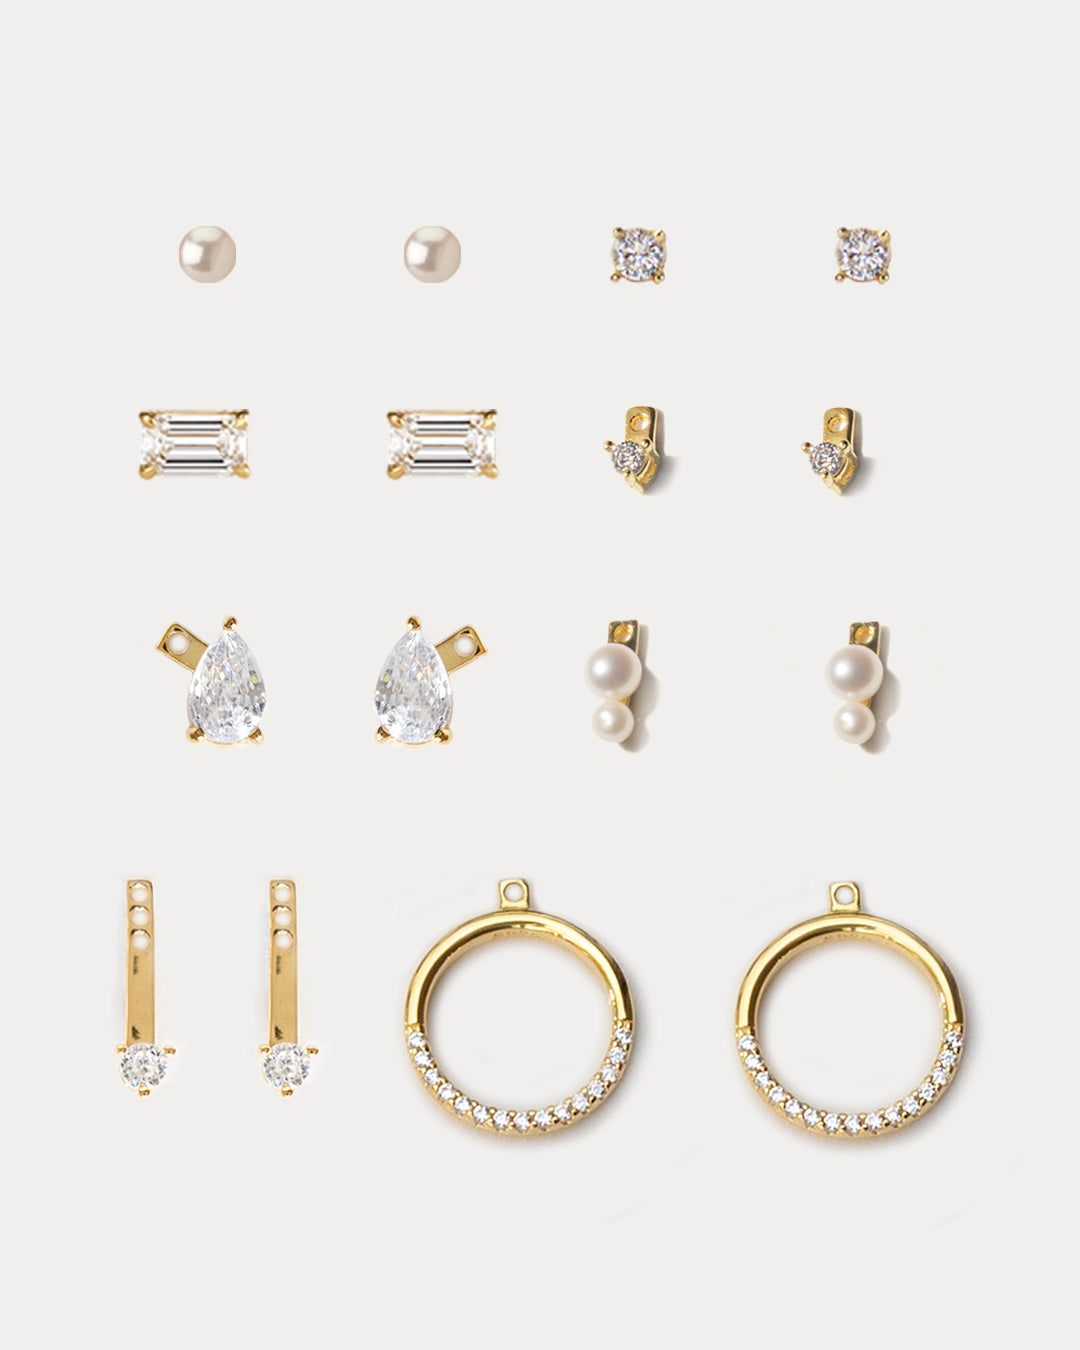 The Statement Earring Capsule Set